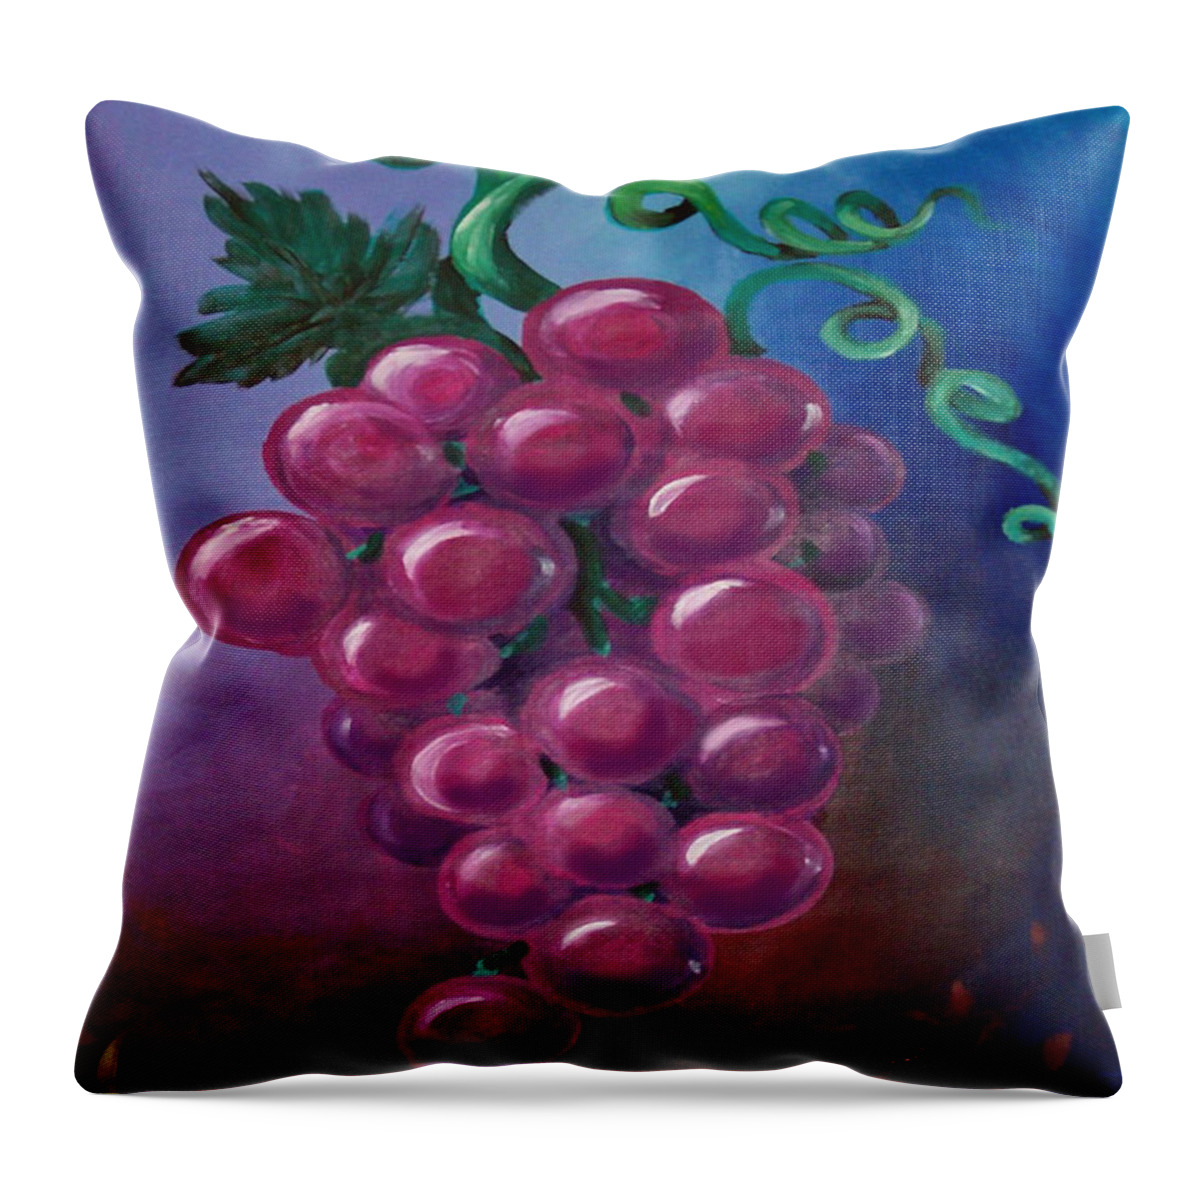 Grape Throw Pillow featuring the painting Grapes by Kevin Middleton